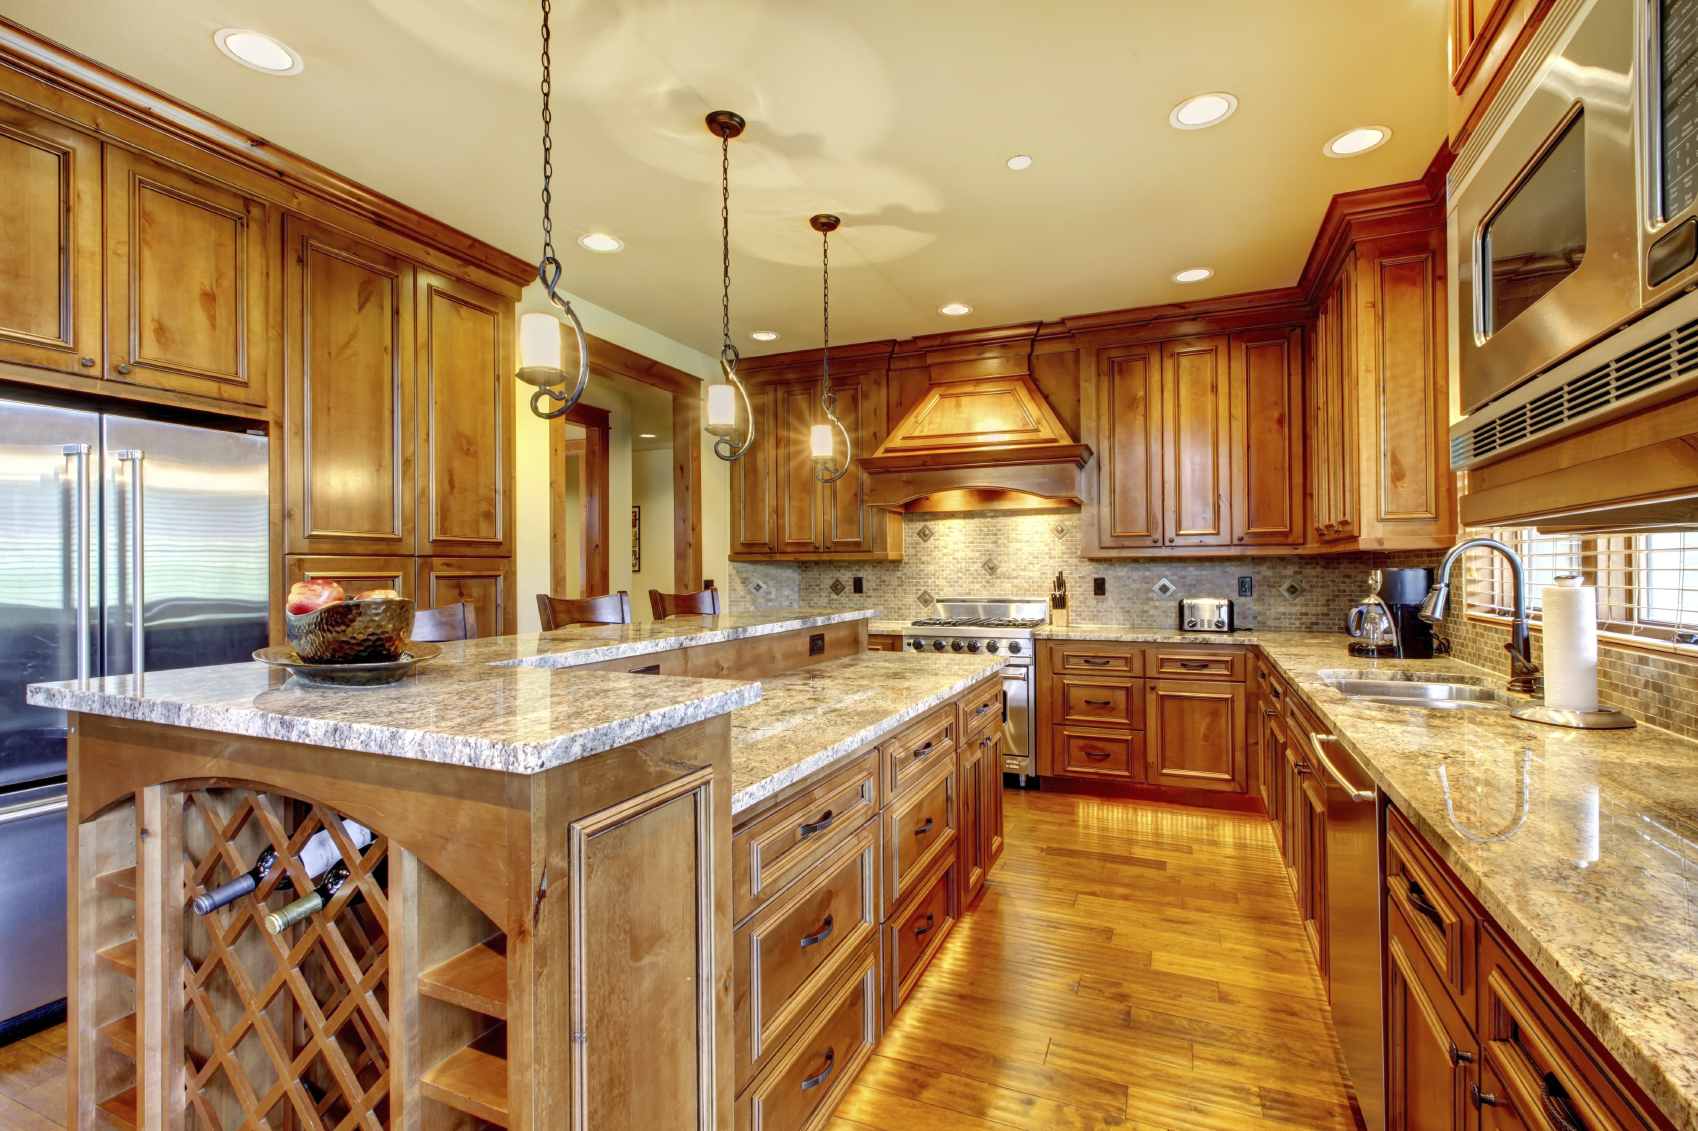 Mountain luxury home with wood kitchen and granite countertop.